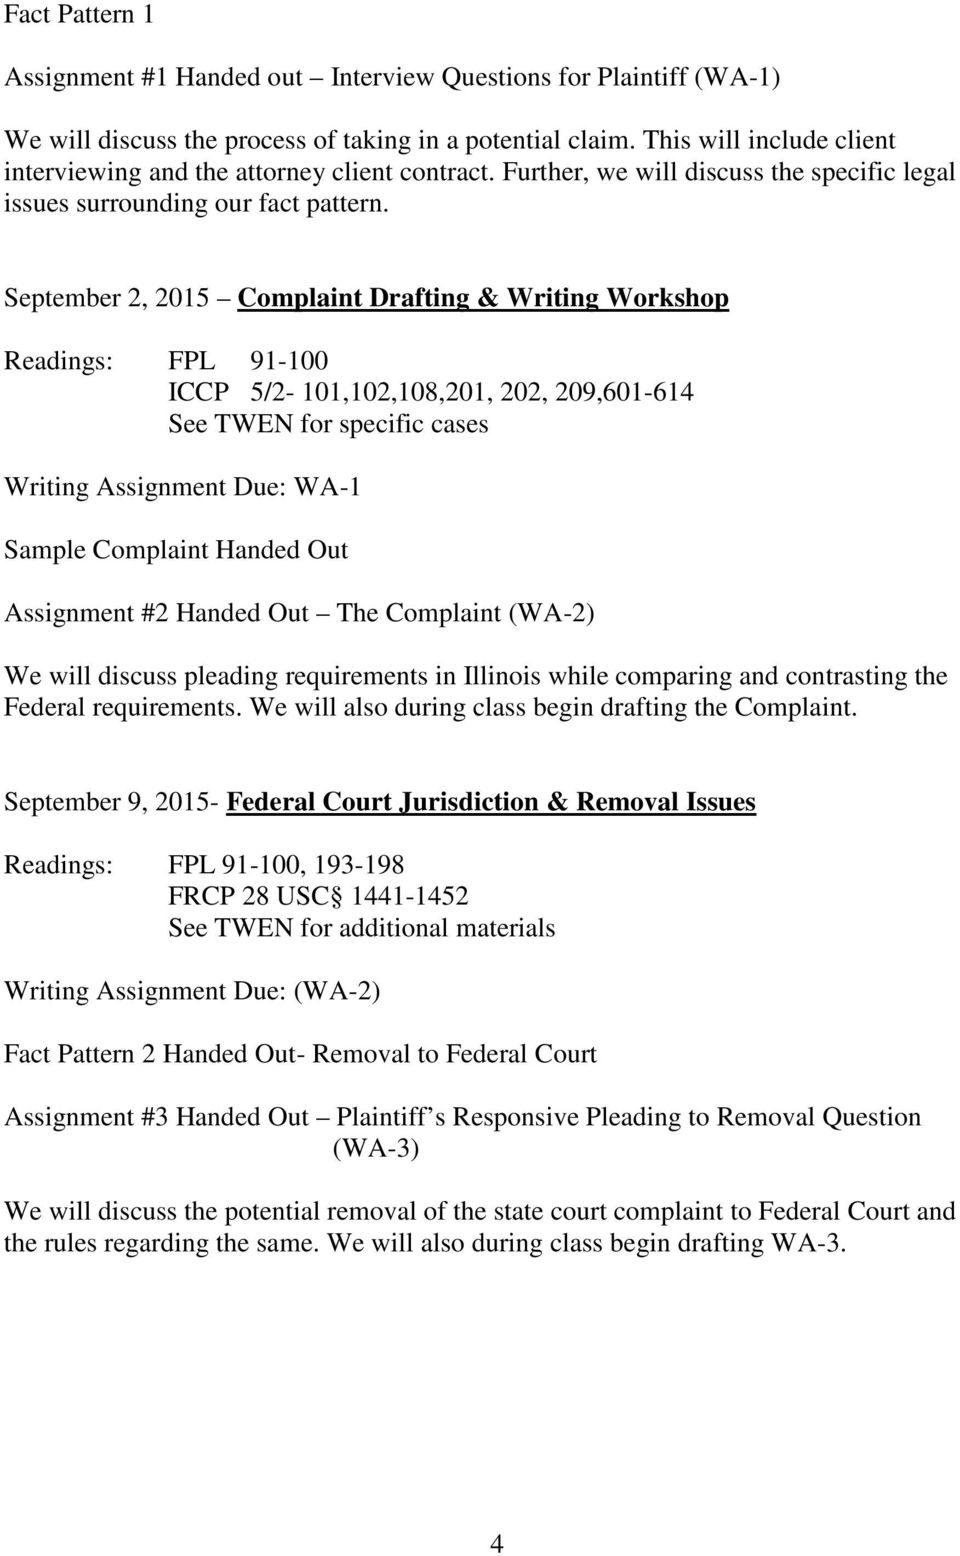 September 2, 2015 Complaint Drafting & Writing Workshop FPL 91-100 ICCP 5/2-101,102,108,201, 202, 209,601-614 See TWEN for specific cases Writing Assignment Due: WA-1 Sample Complaint Handed Out